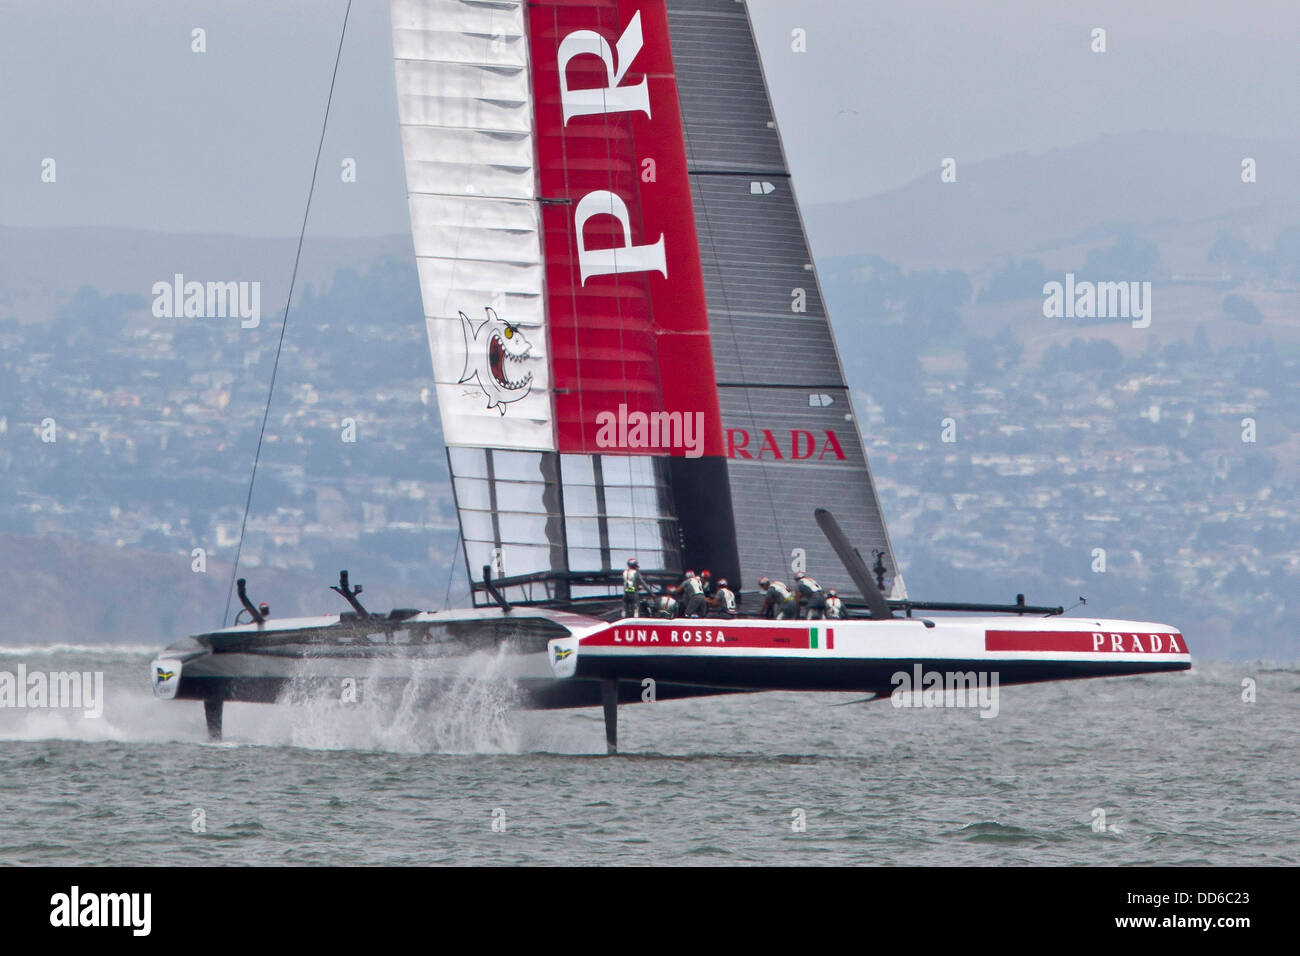 Aug. 24, 2013 - San Francisco, California, USA - Italy's Team Luna Rossa Challenge 2013 competes in the Louis Vuitton Cup at the 34th America's Cup in San Francisco California USA. (Credit Image: © Dave Smith/ZUMAPRESS.com) Stock Photo